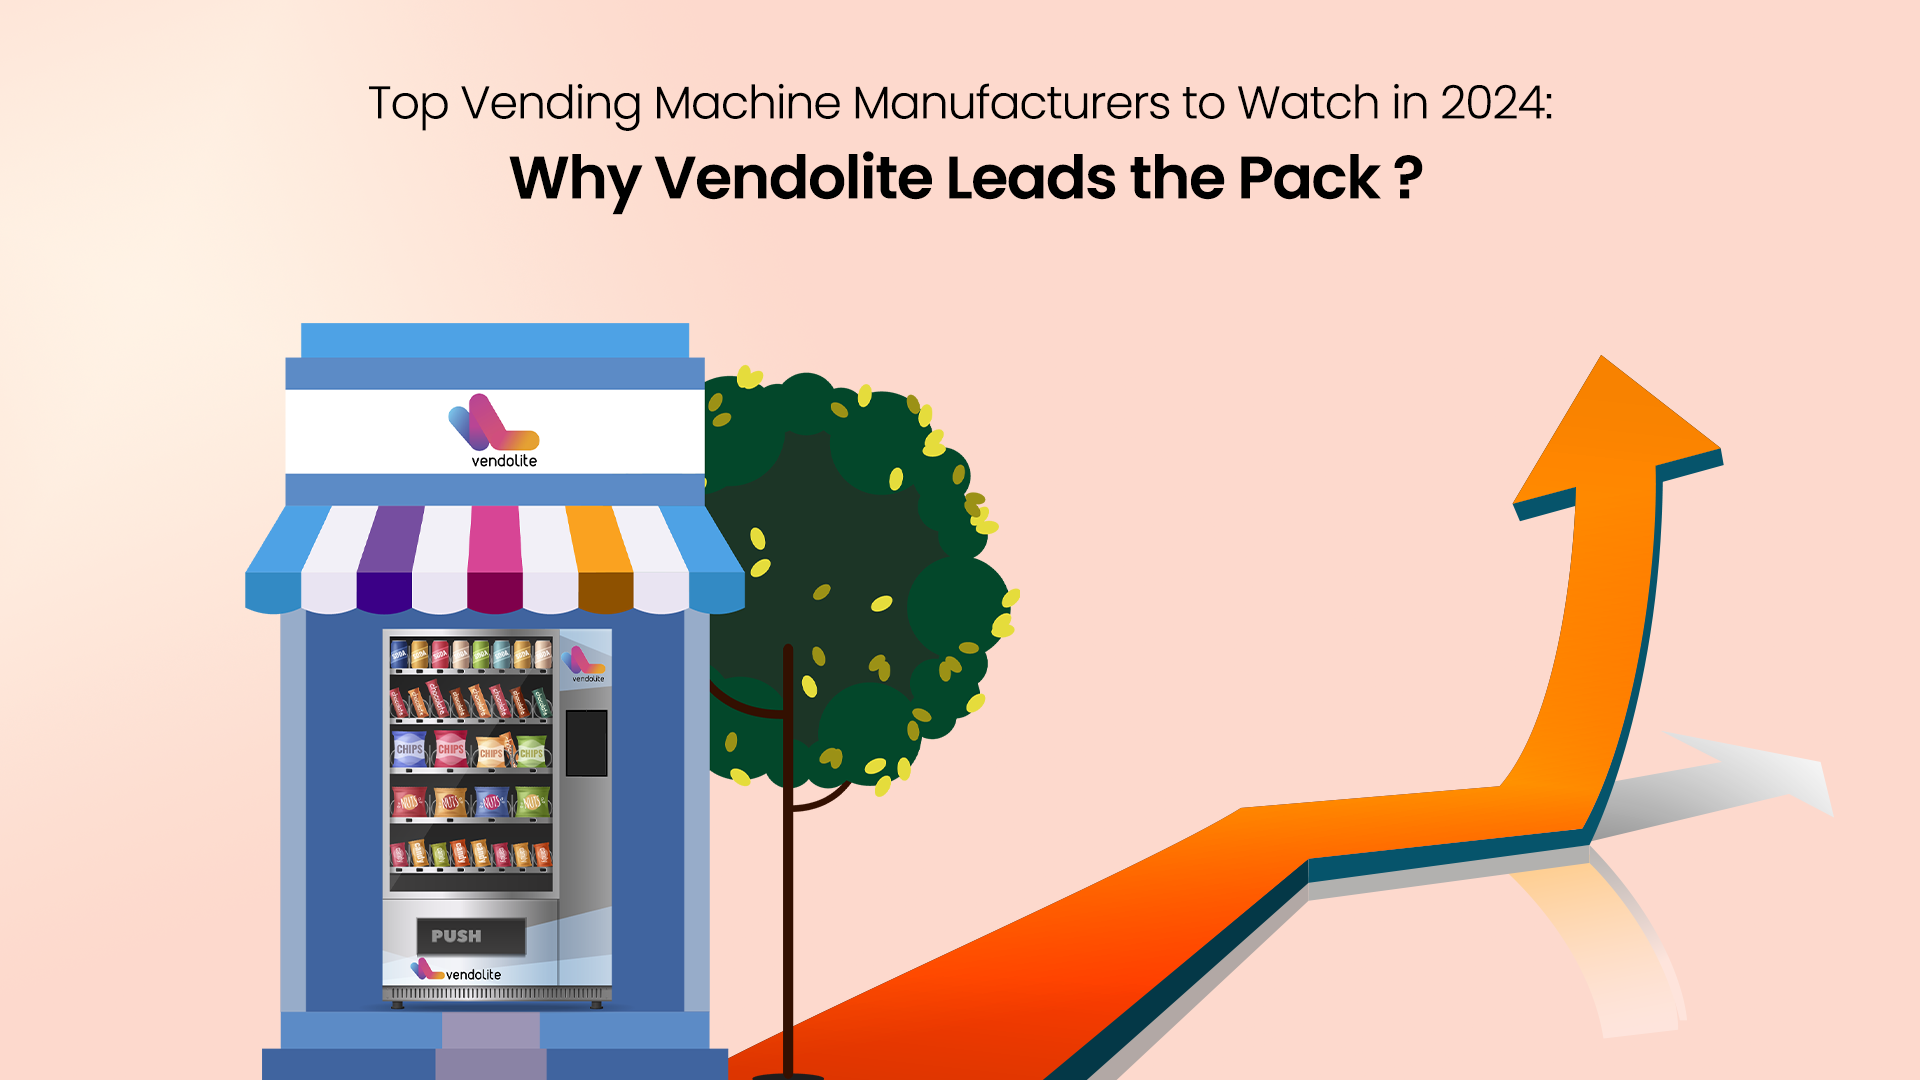 Top Vending Machine Manufacturers to Watch in 2024: Why Vendolite Leads the Pack